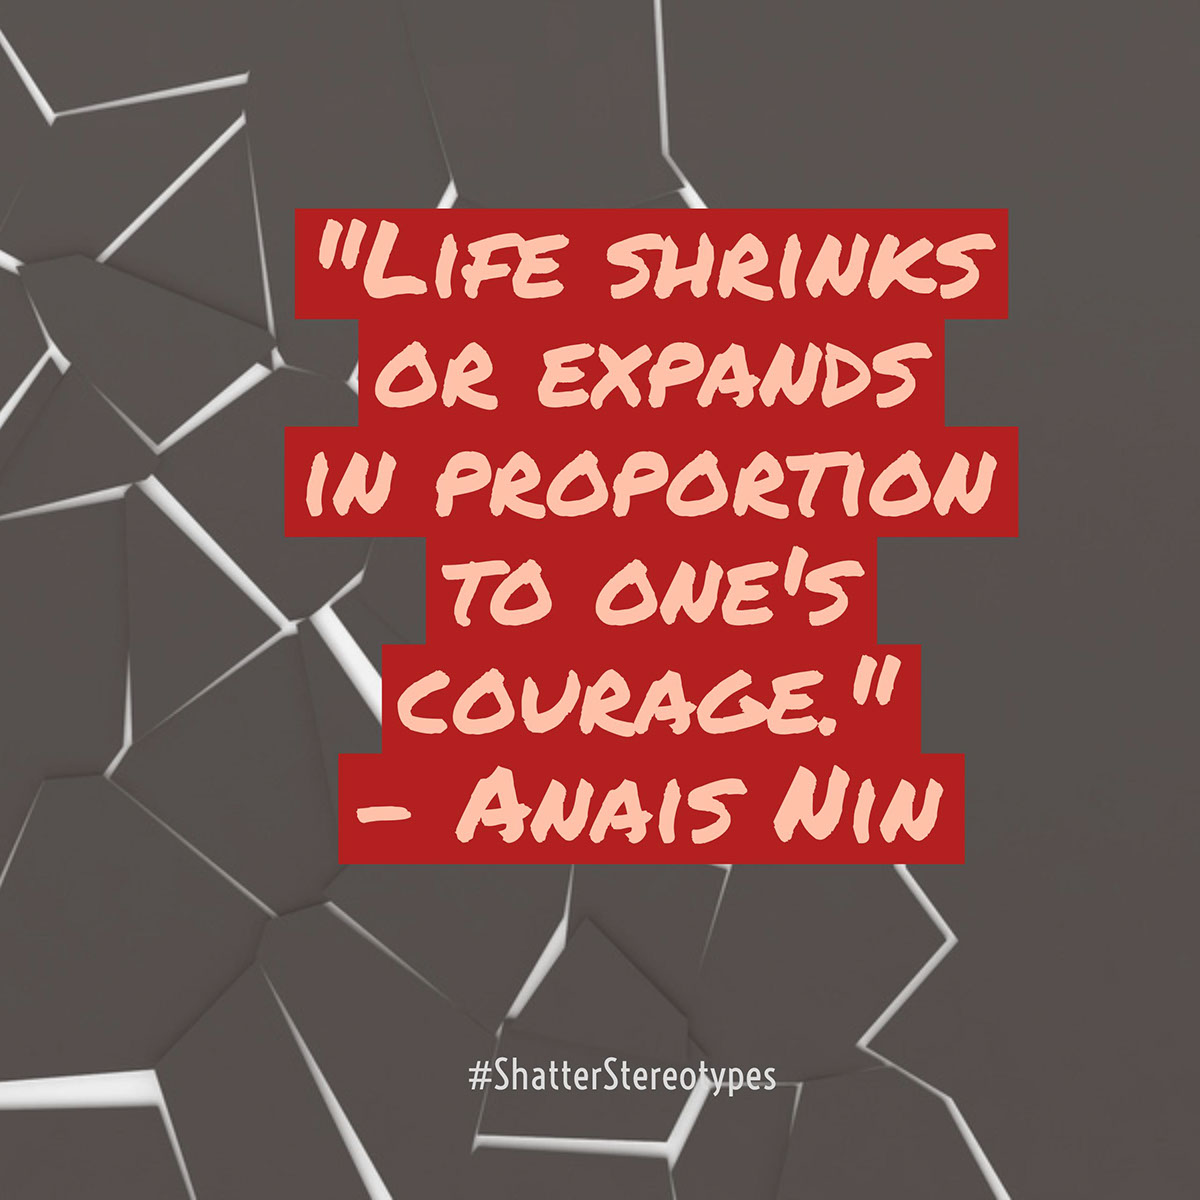 "Life shrinks or expands in proportion to one's courage." - Anais Nin